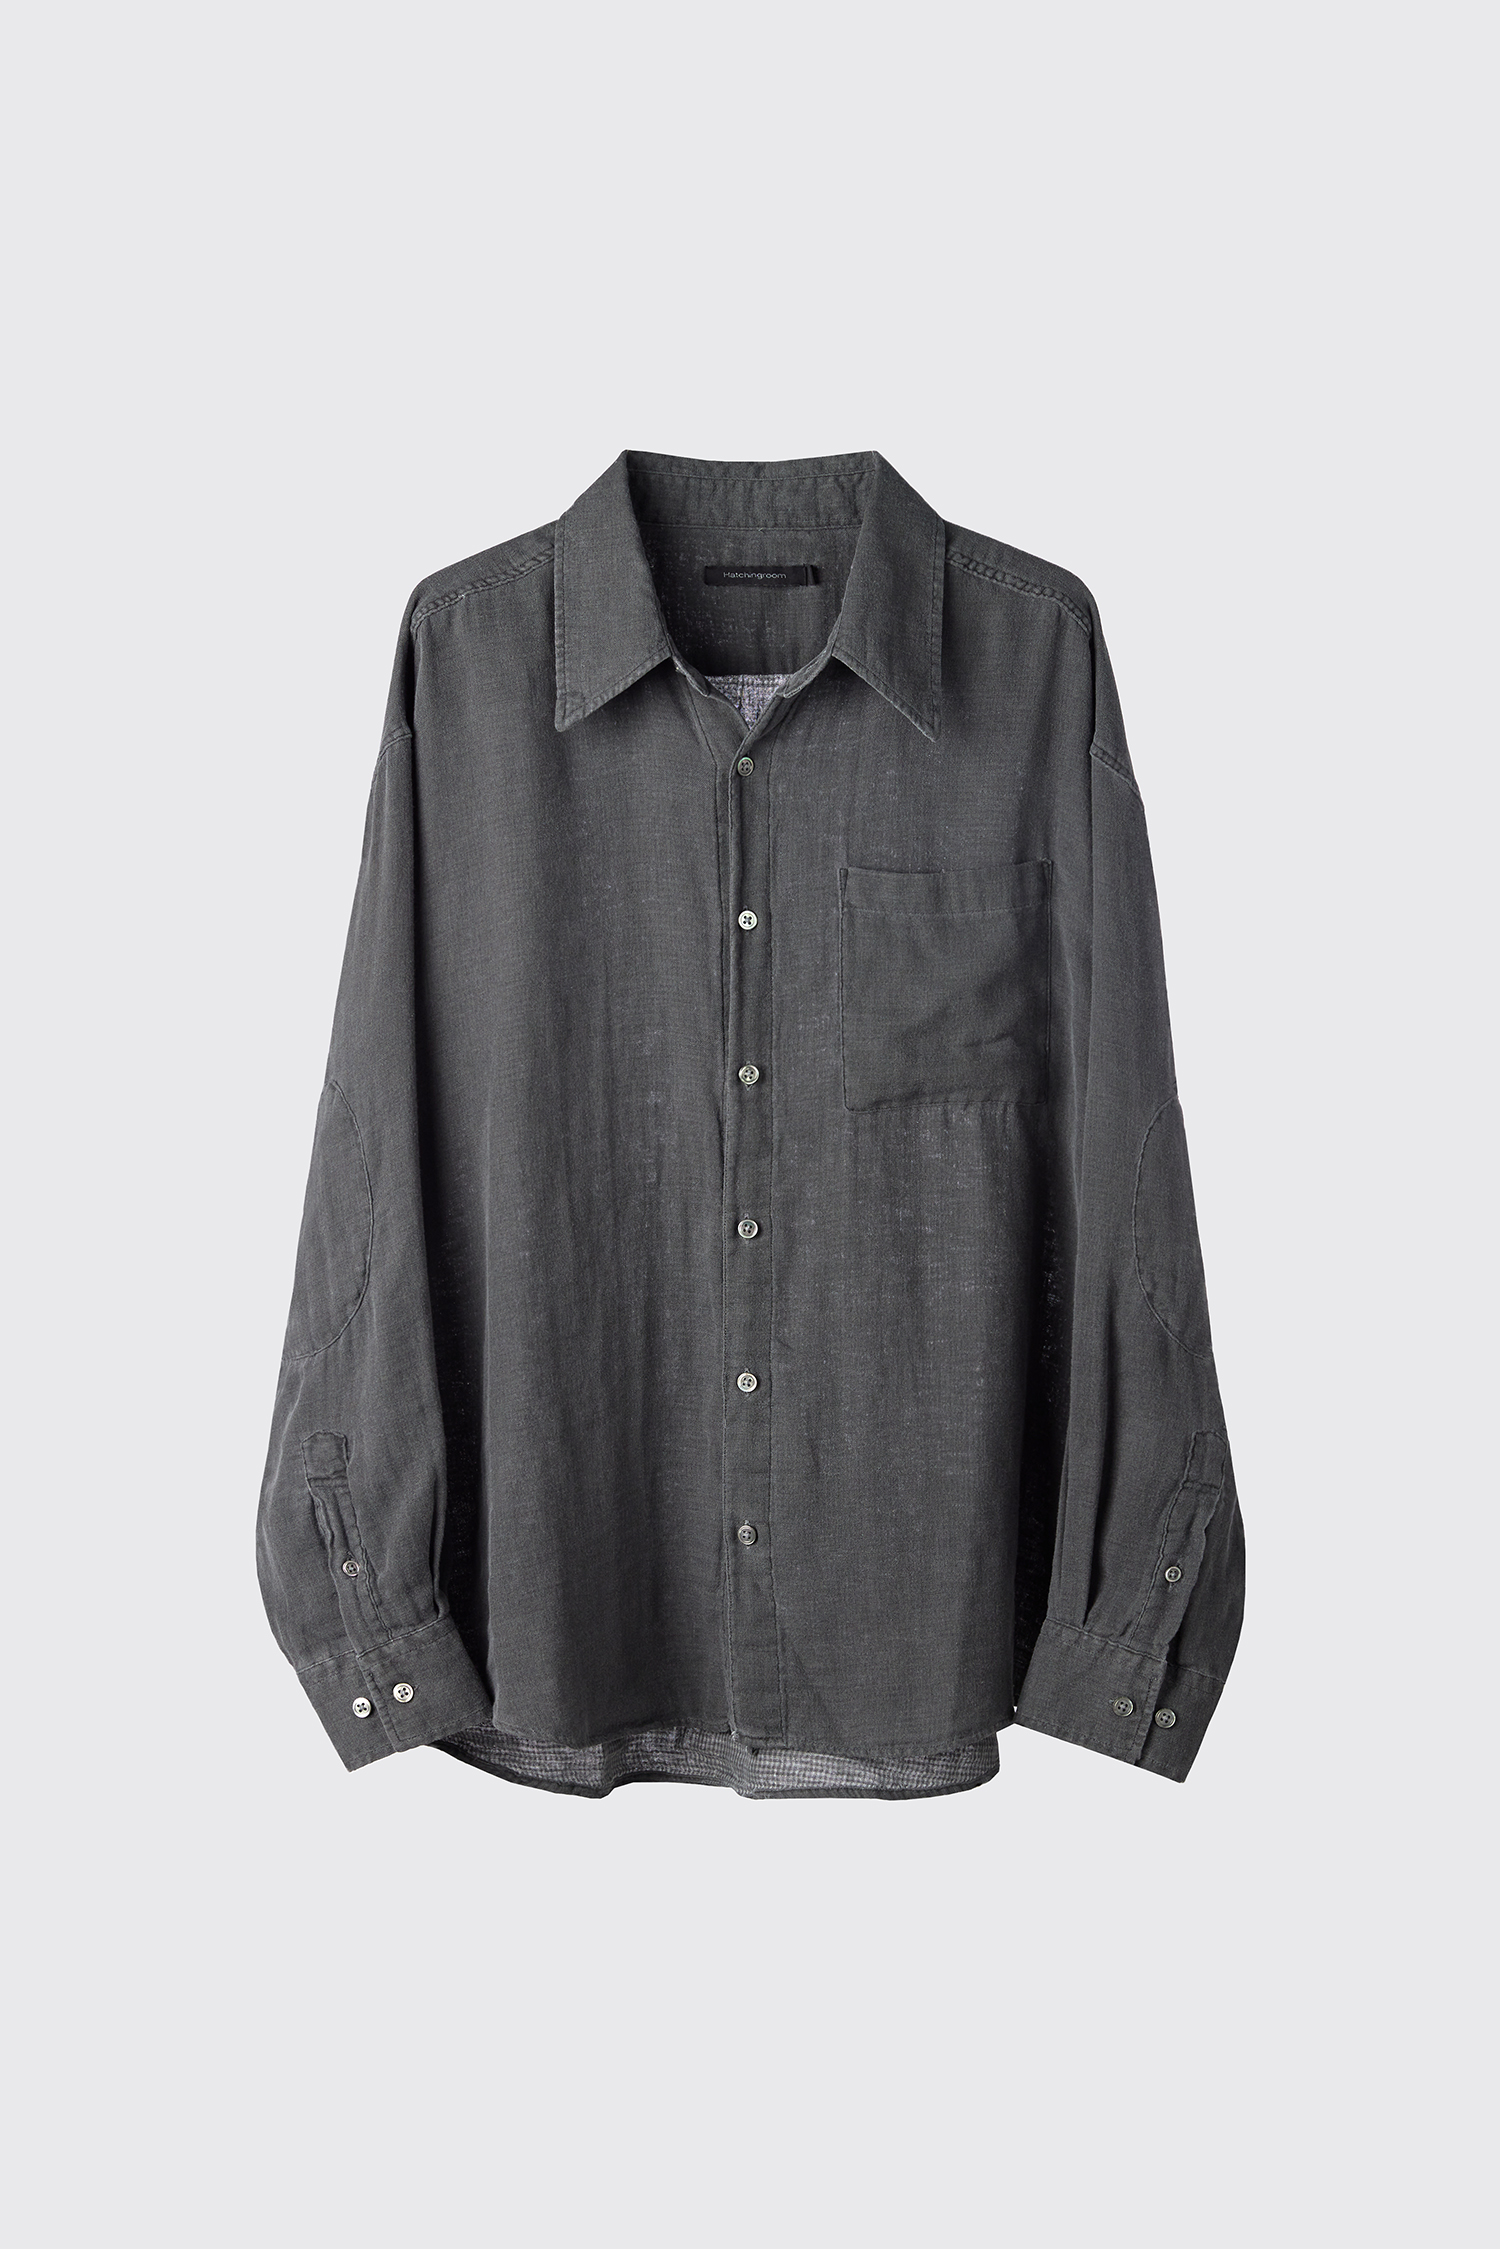 Archive Shirt V2 Pigment Dyed Charcoal